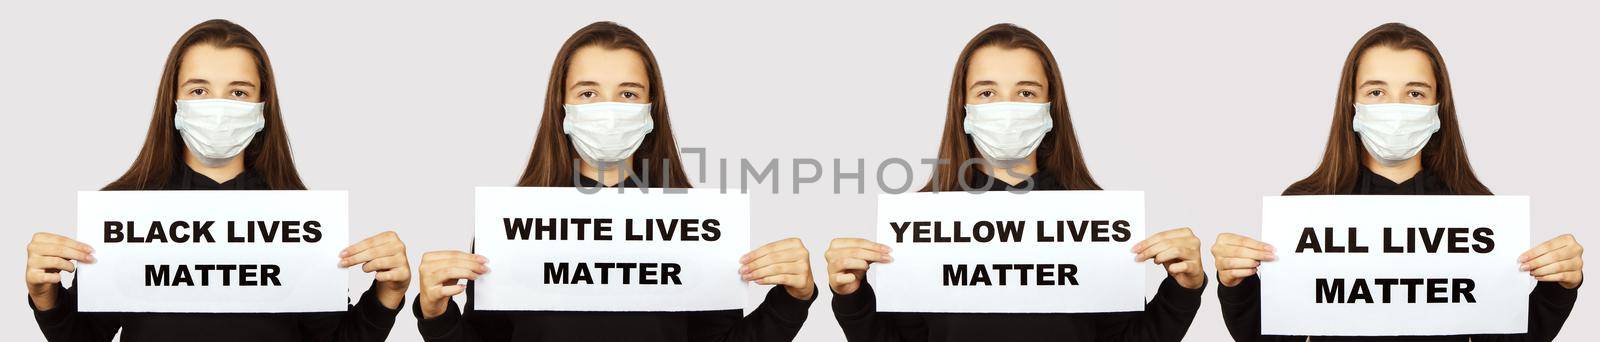 teen girl holding a poster all lives matter indoor on light background